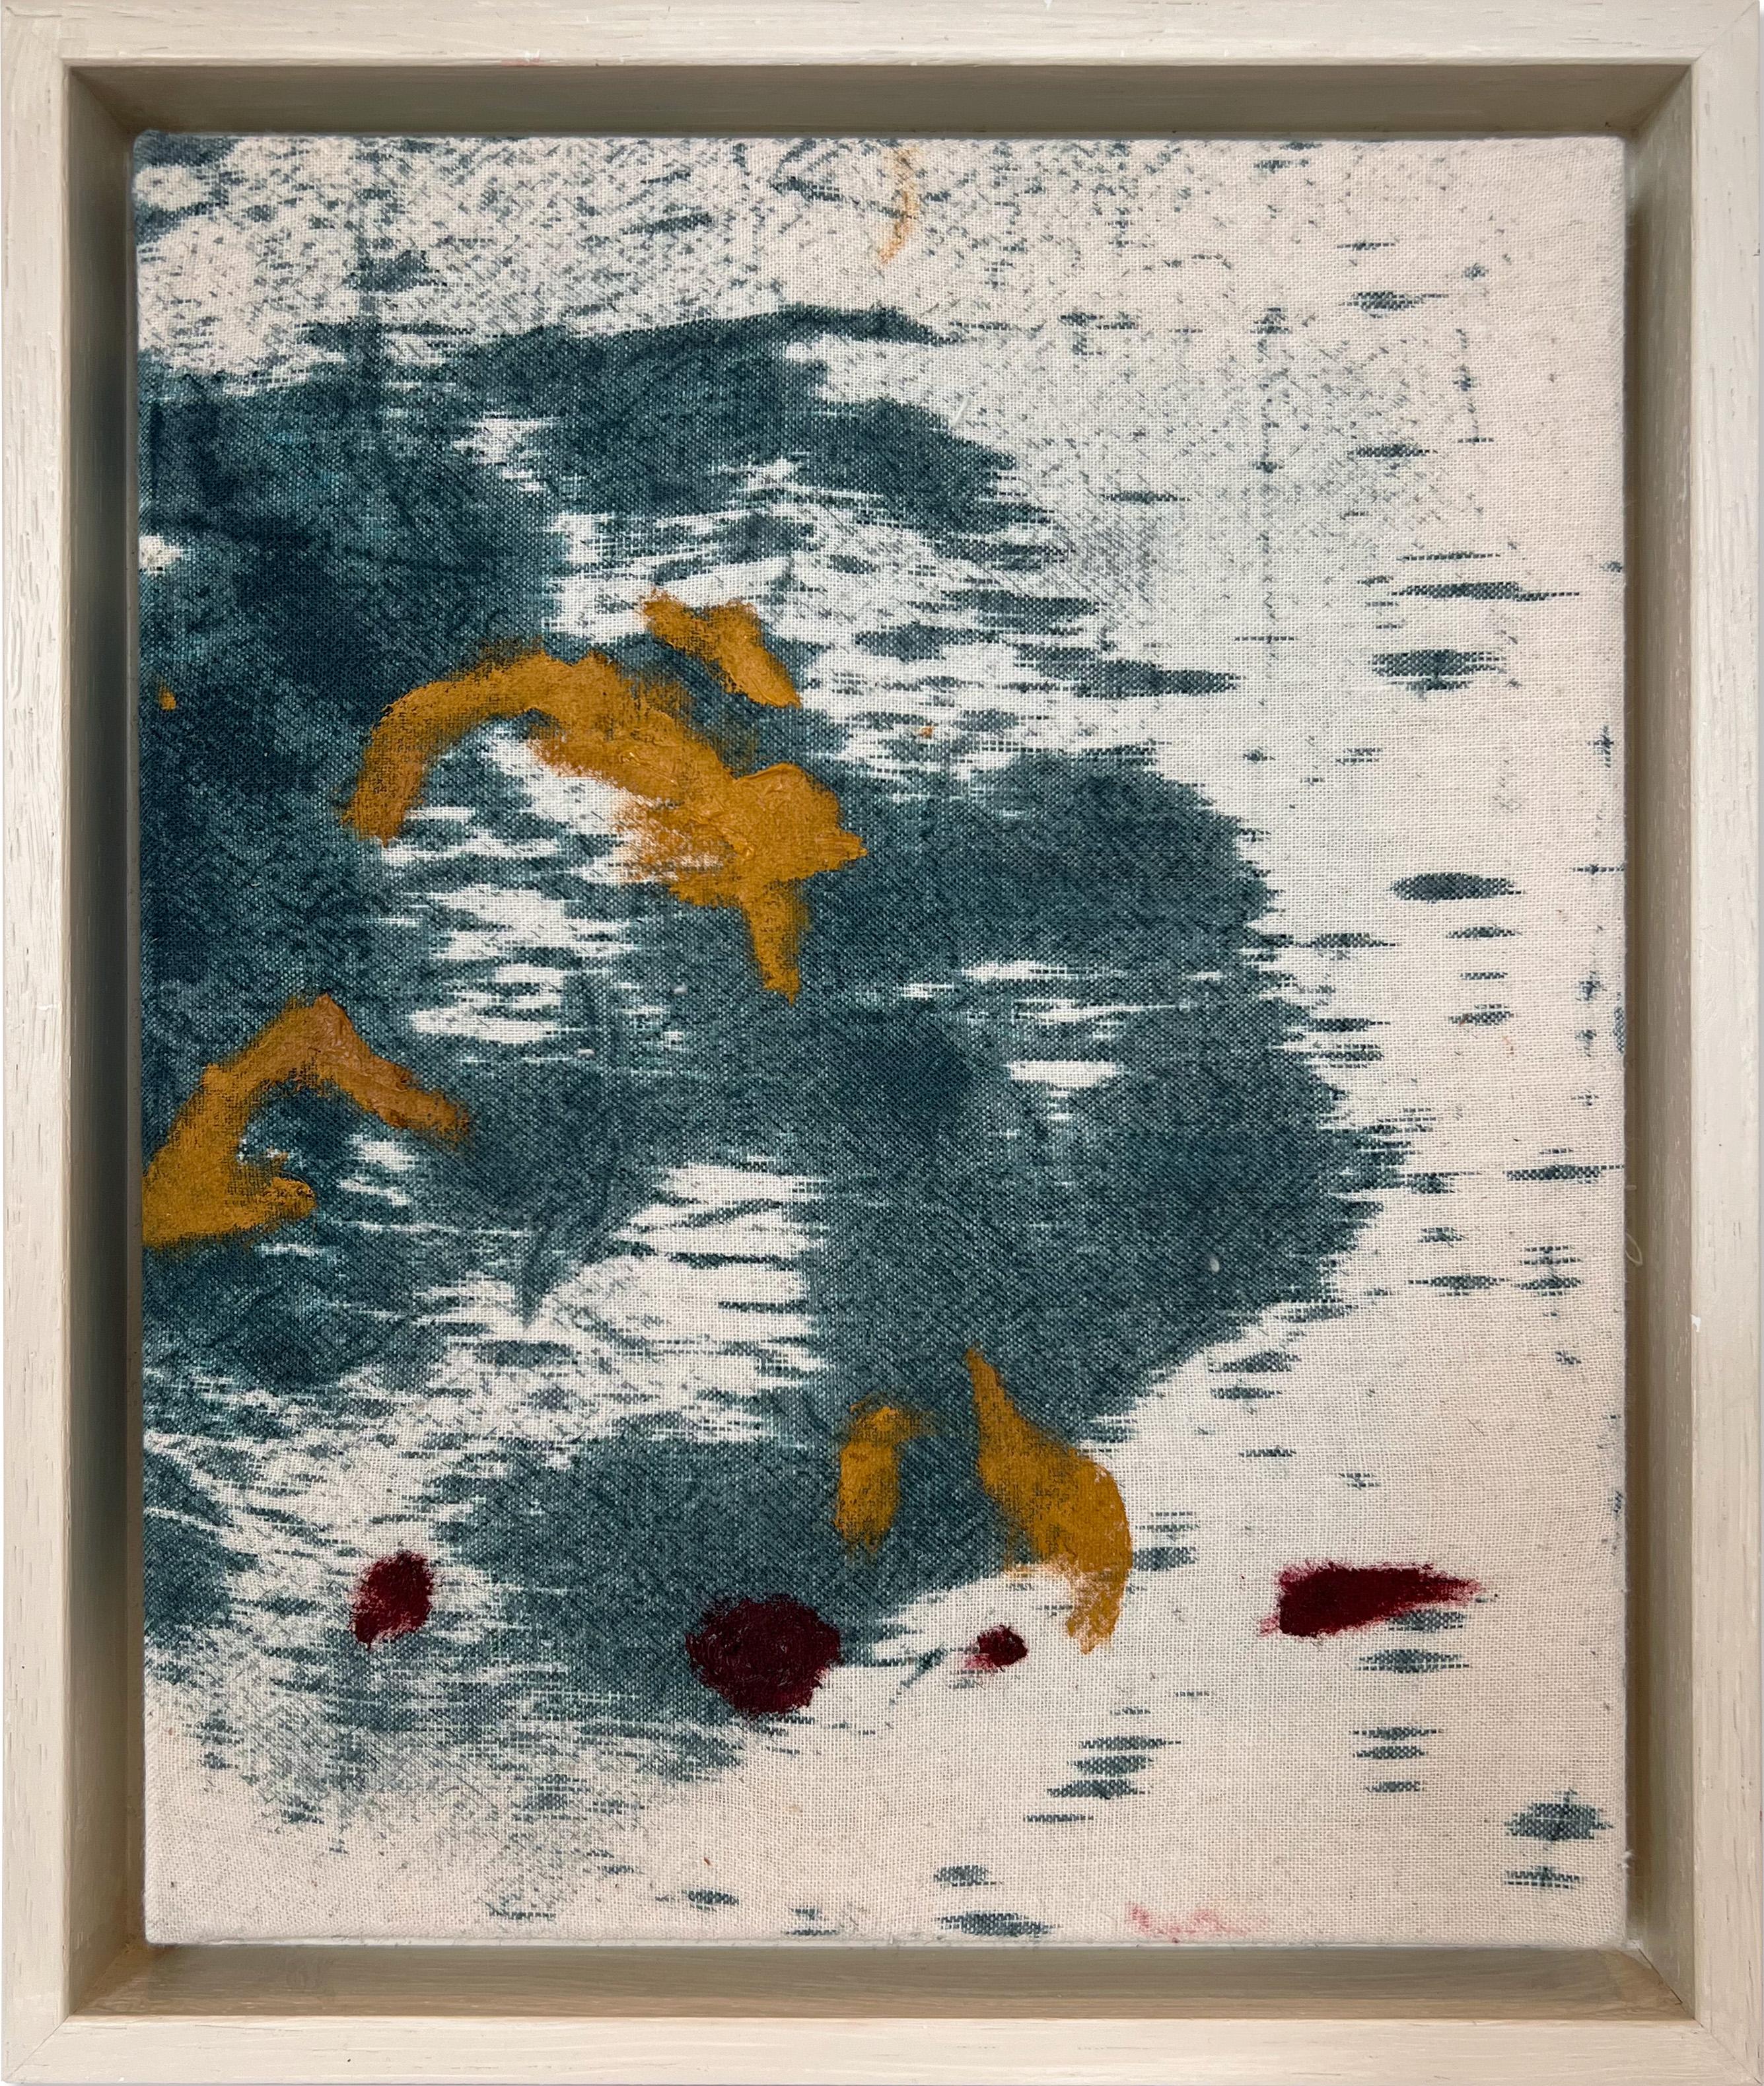 Nicholas Evans Abstract Painting - "Day Remains I" (abstract, blue dye, deep red, yellow, framed painting, cotton)